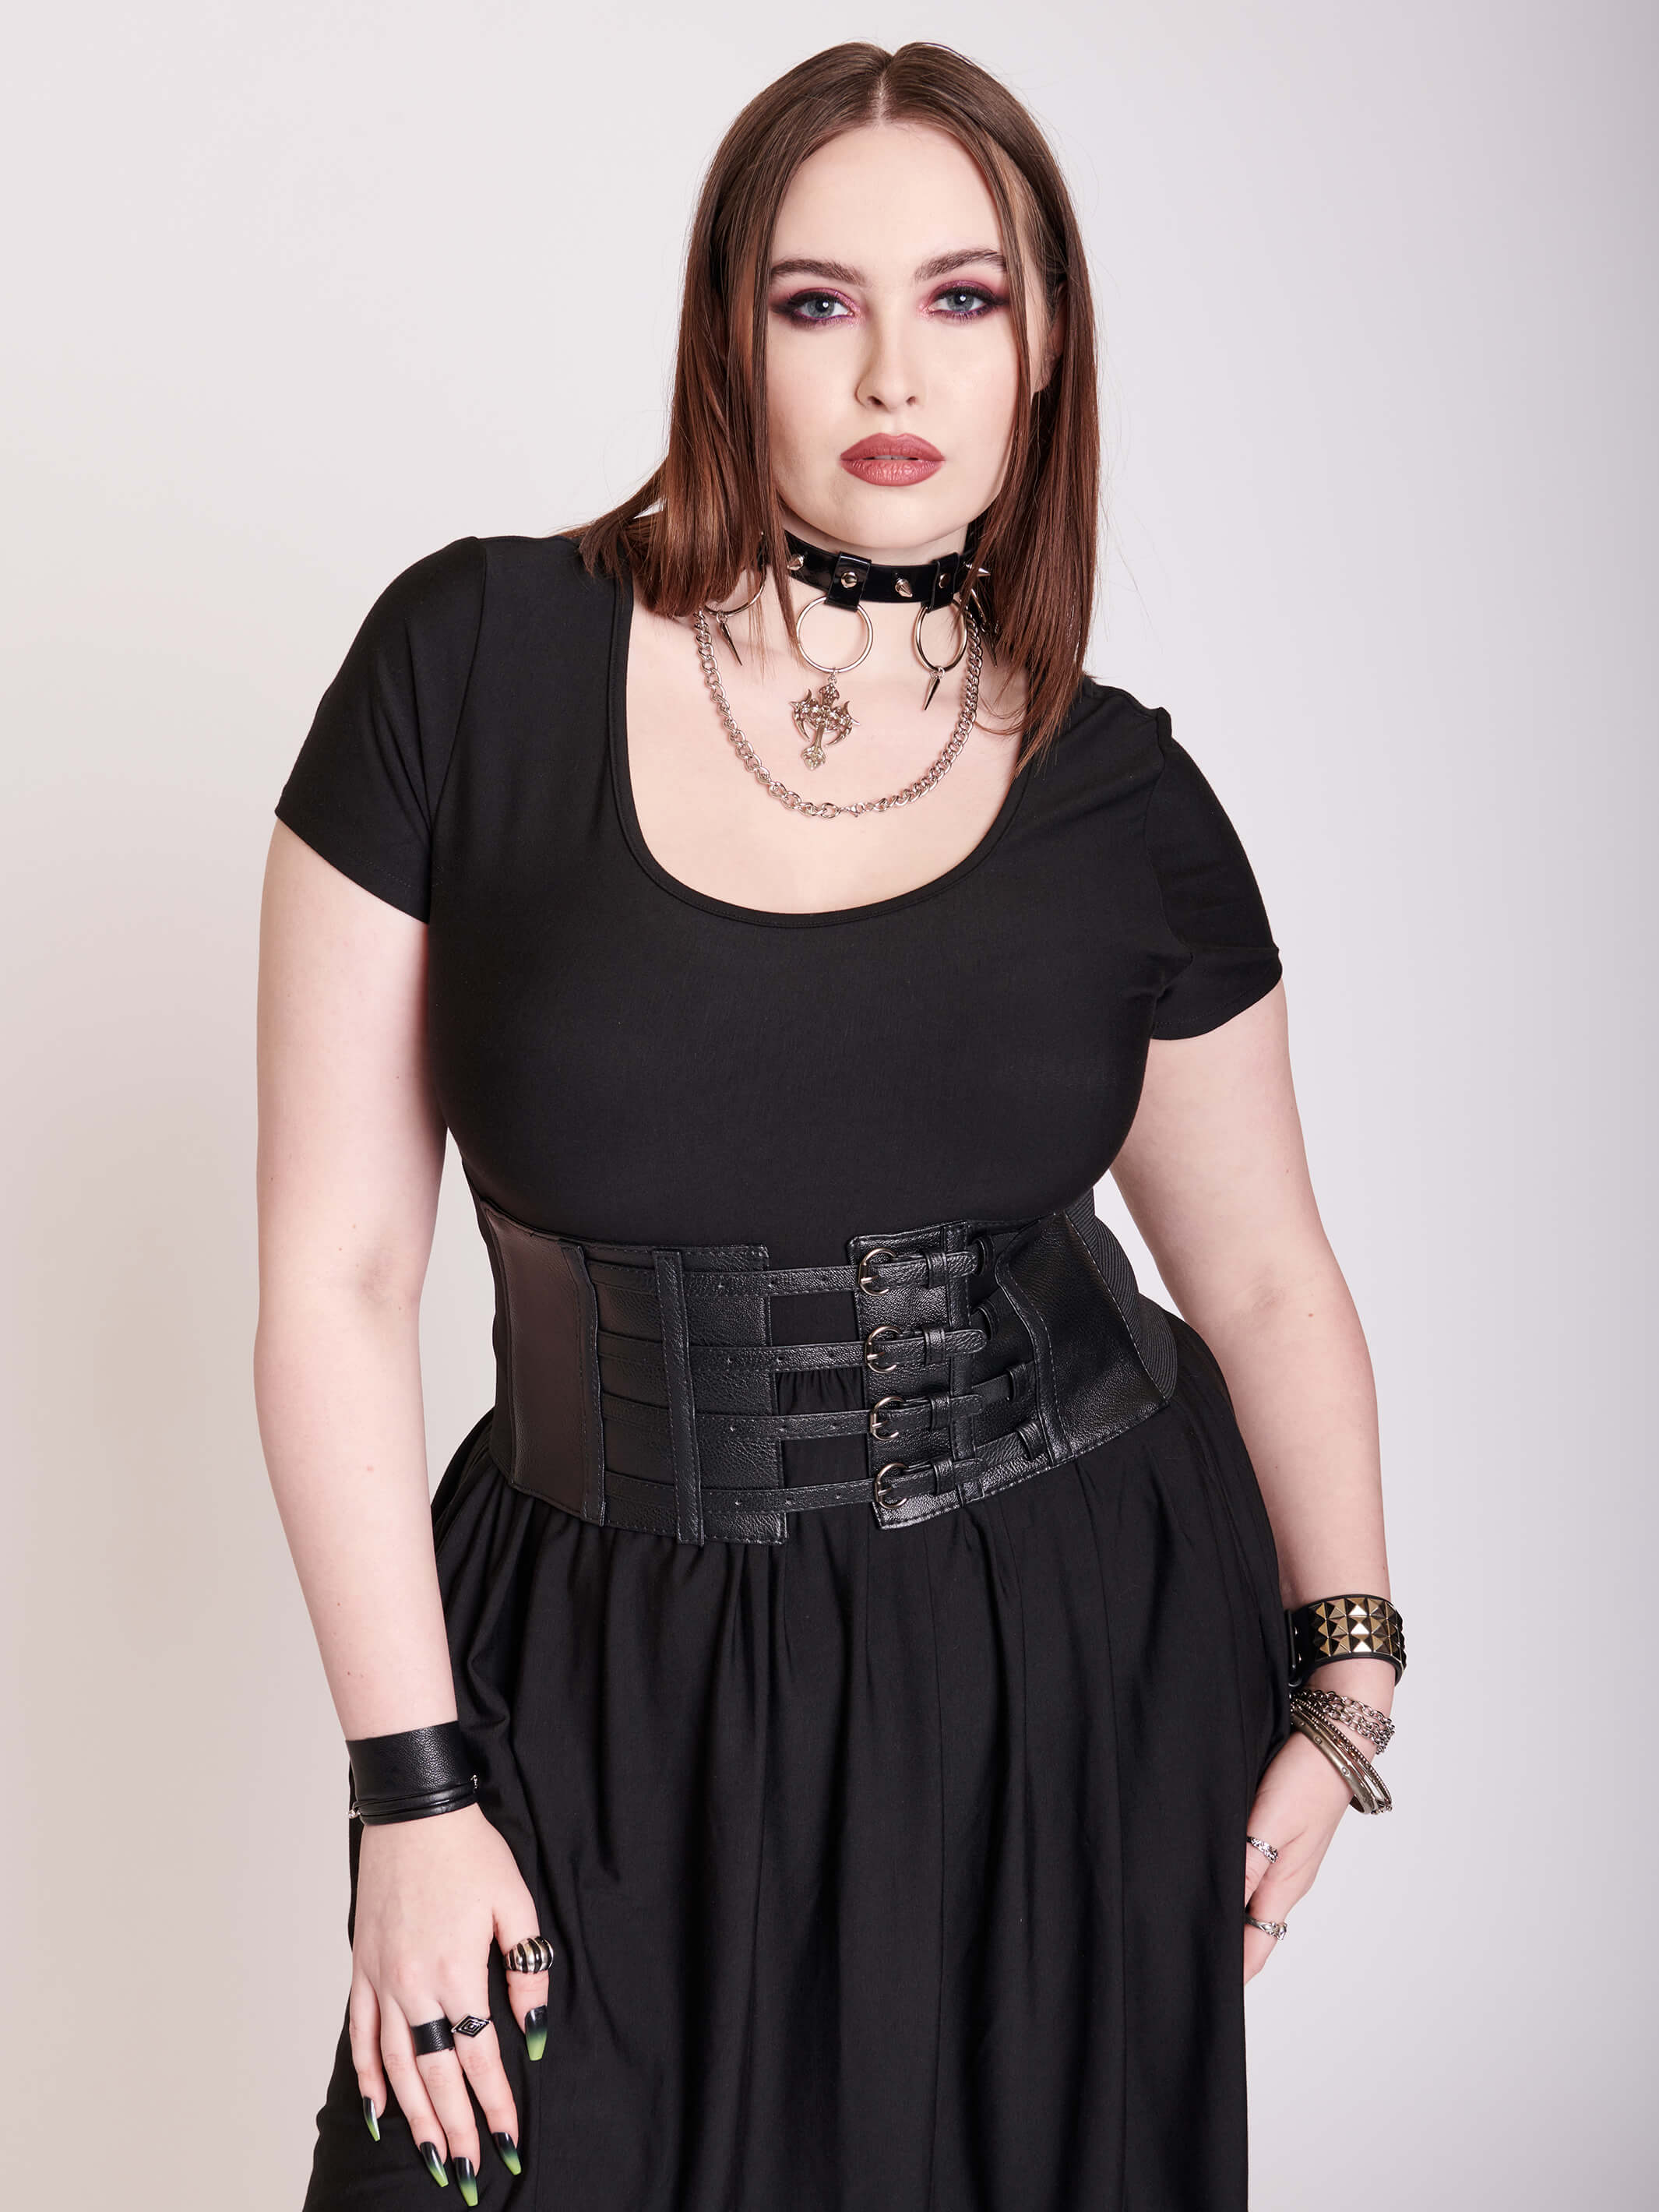 corset belt outfit  Corset belt outfit, Corset fashion outfits